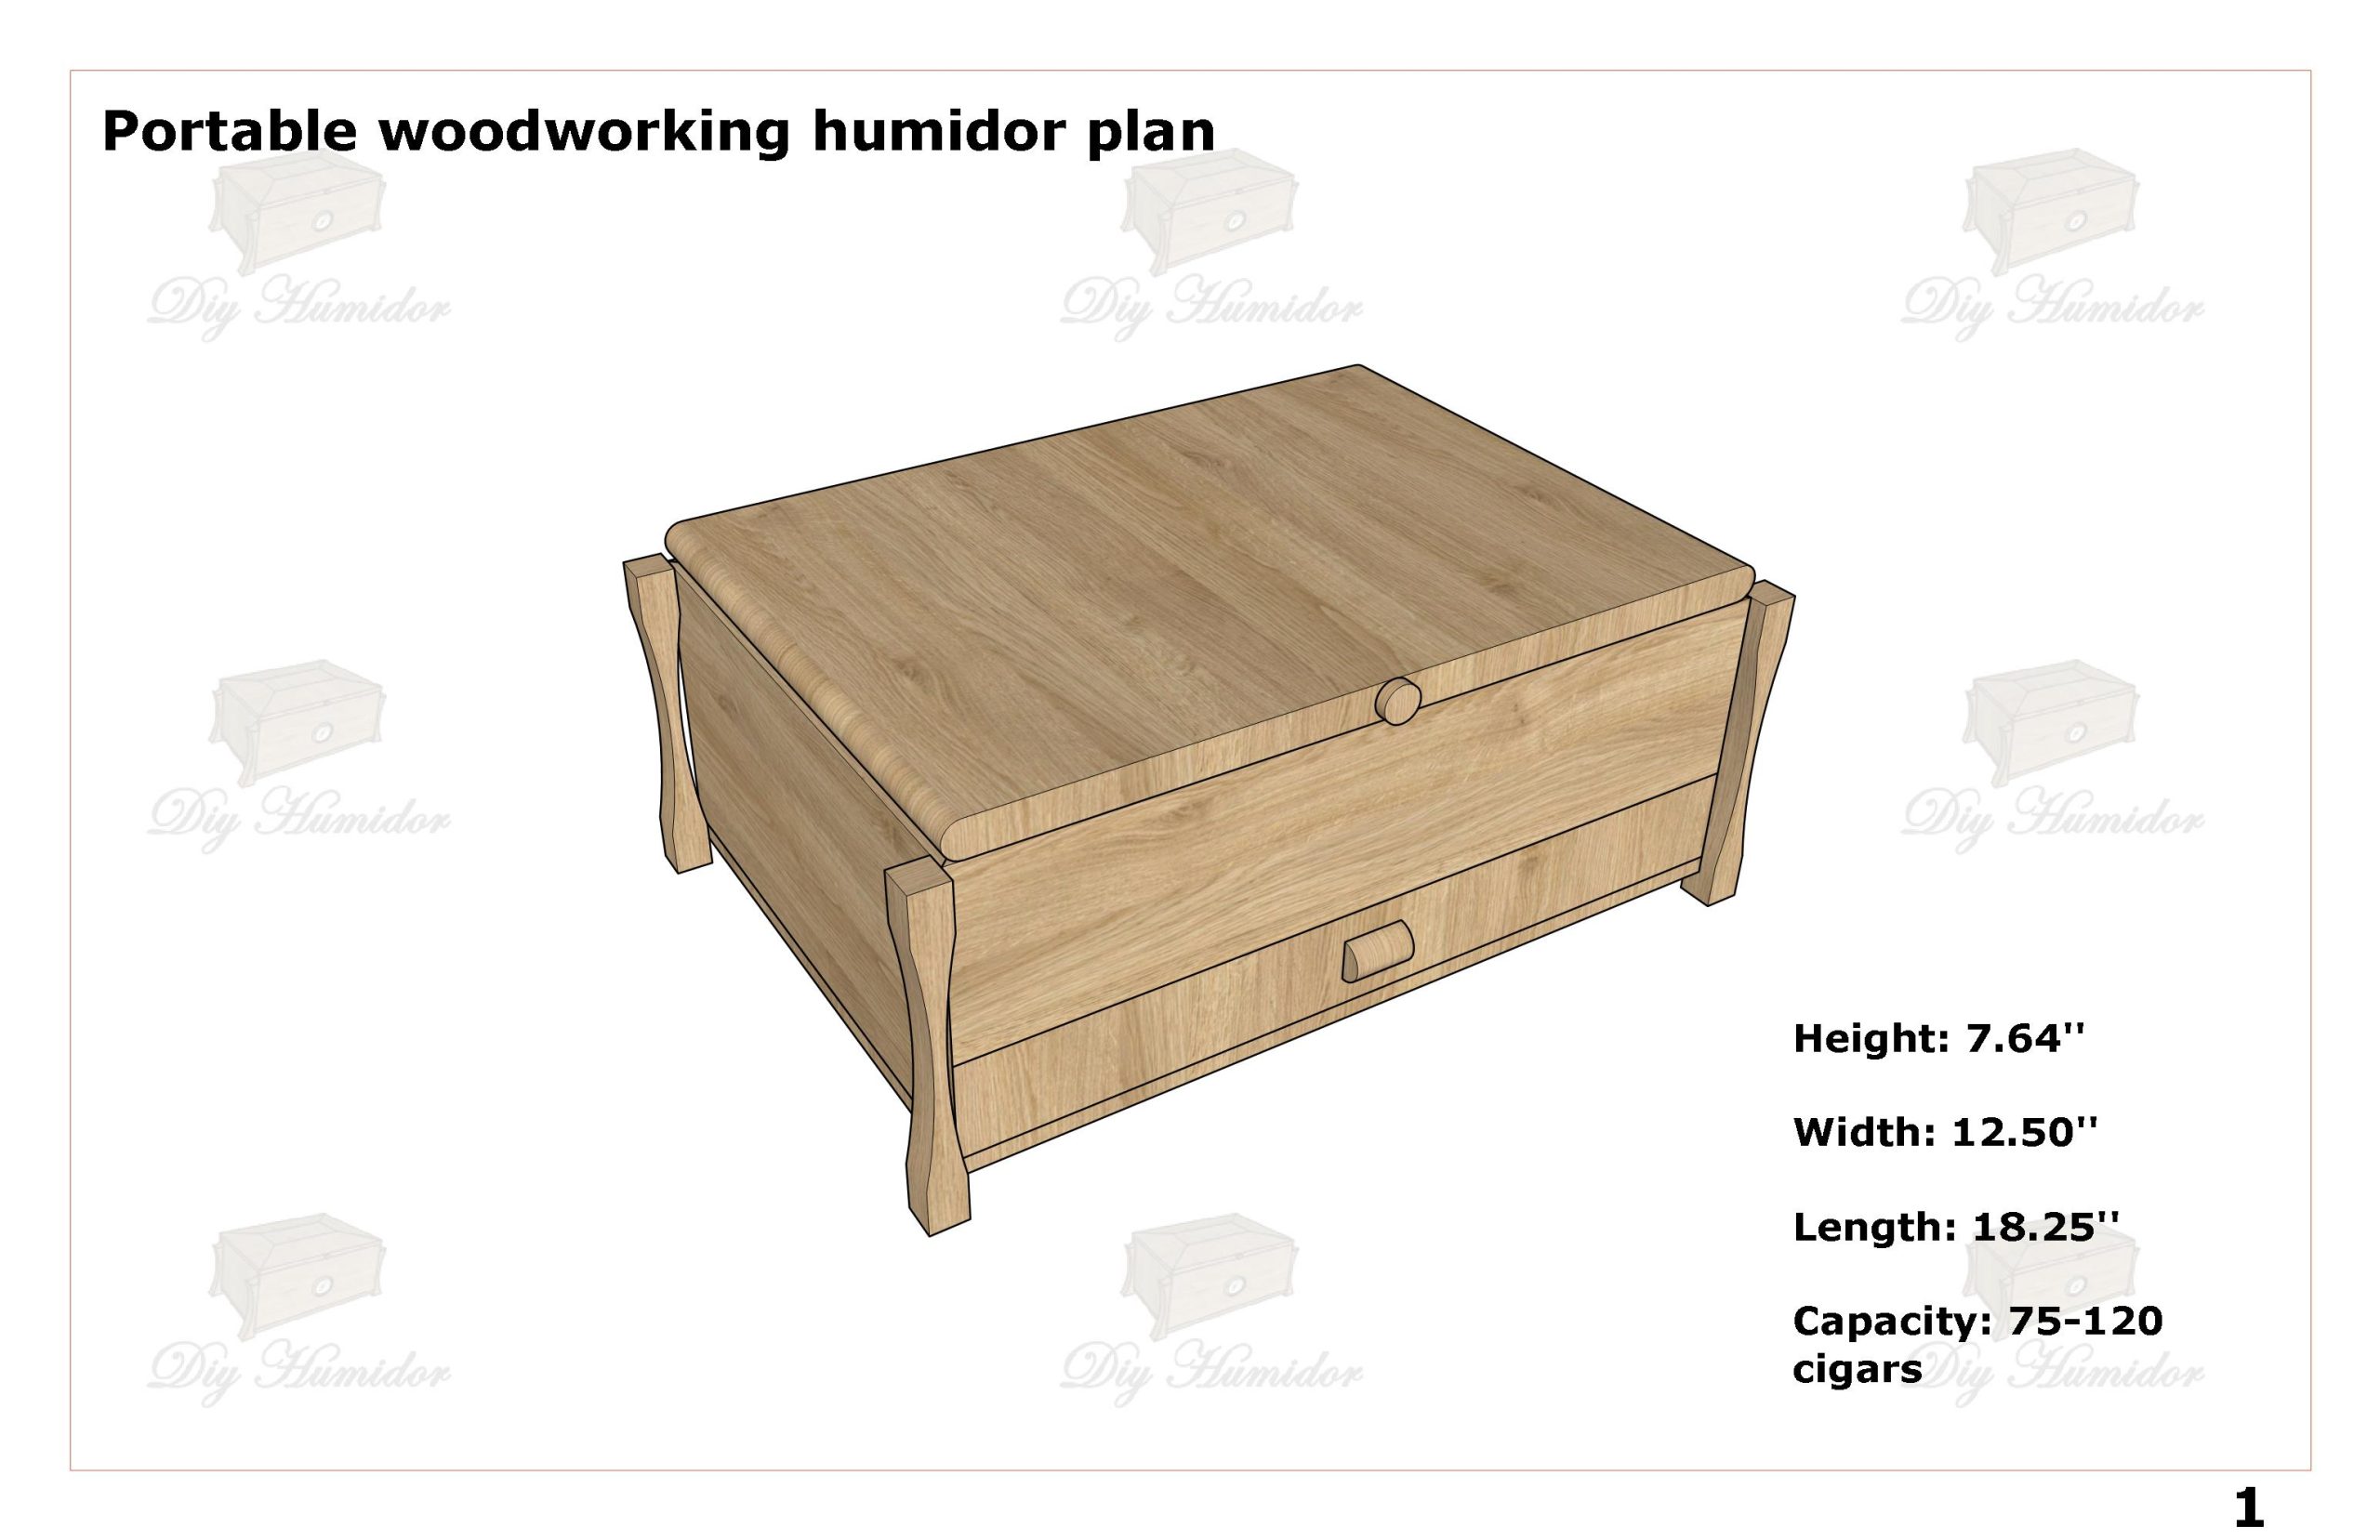 Portable woodworking humidor plans free_01